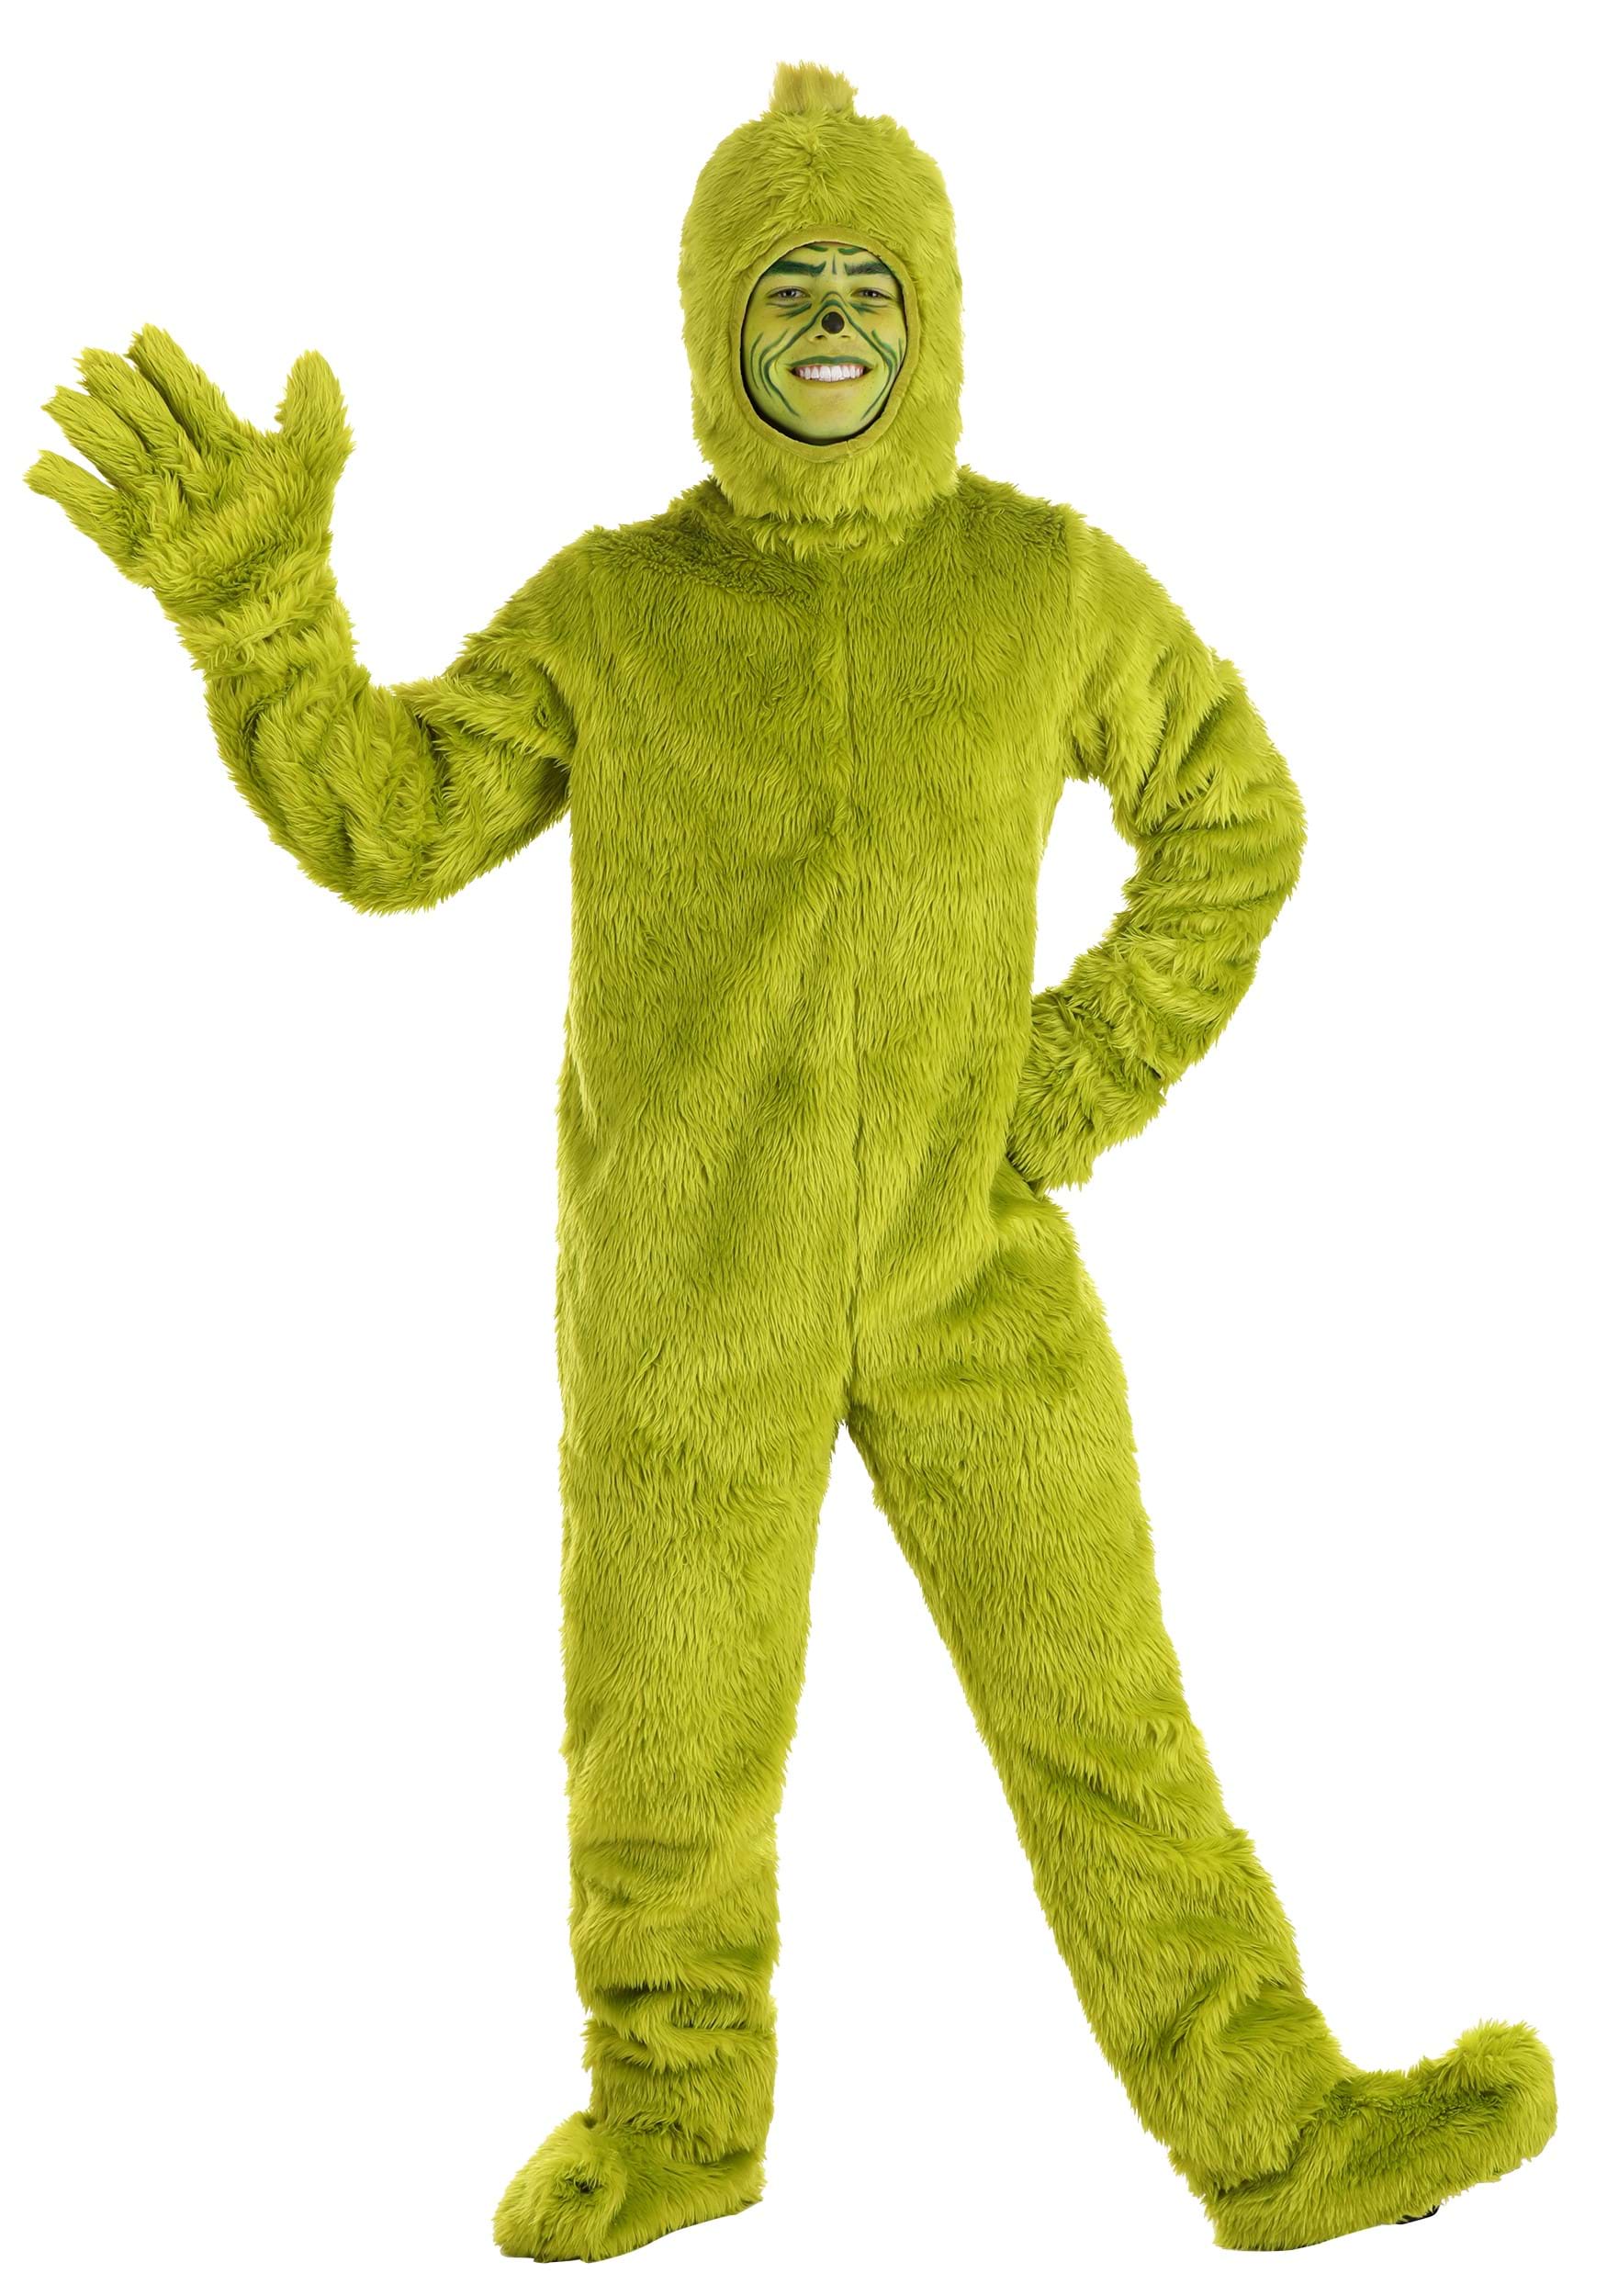 Dr. Seuss Grinch Open Face Adult Costume | Grinch Costumes